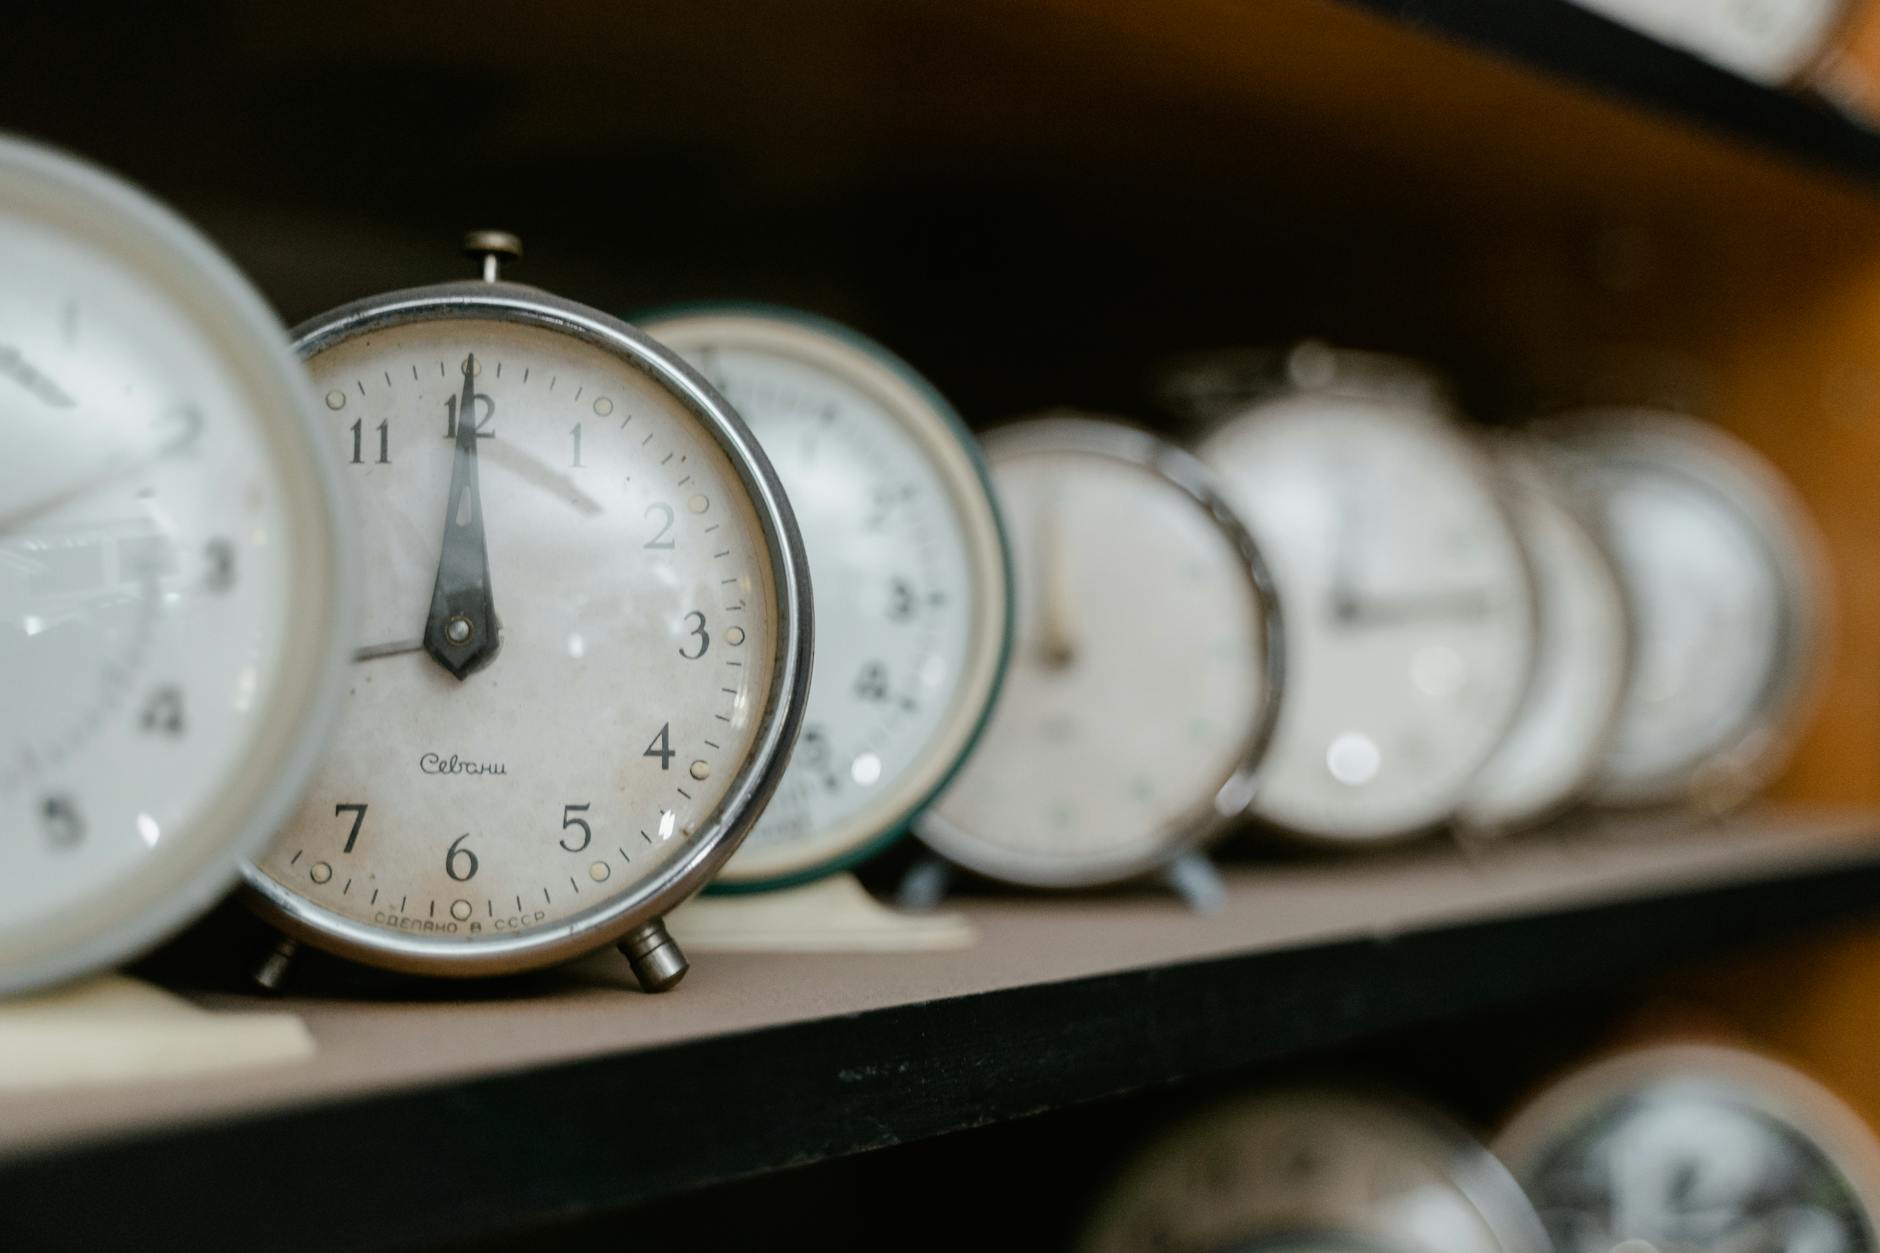 A row of clocks on a shelf metaphorically suggest that there is "time enough at last."